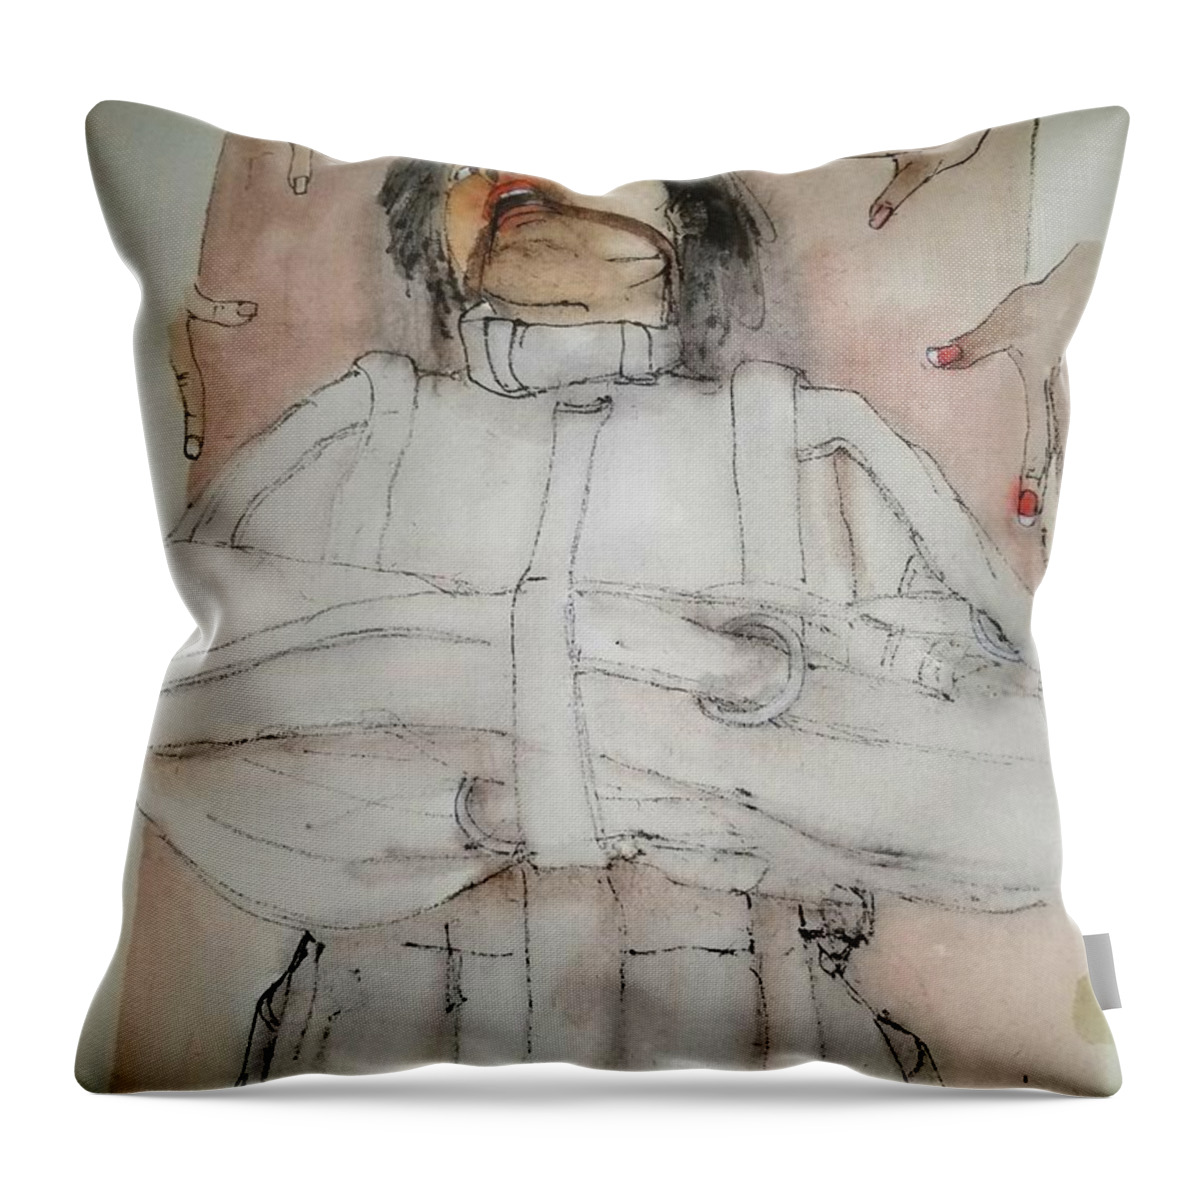 Mental Illness. Patient. Treatment. Ect Throw Pillow featuring the painting Mental illness hurts album by Debbi Saccomanno Chan